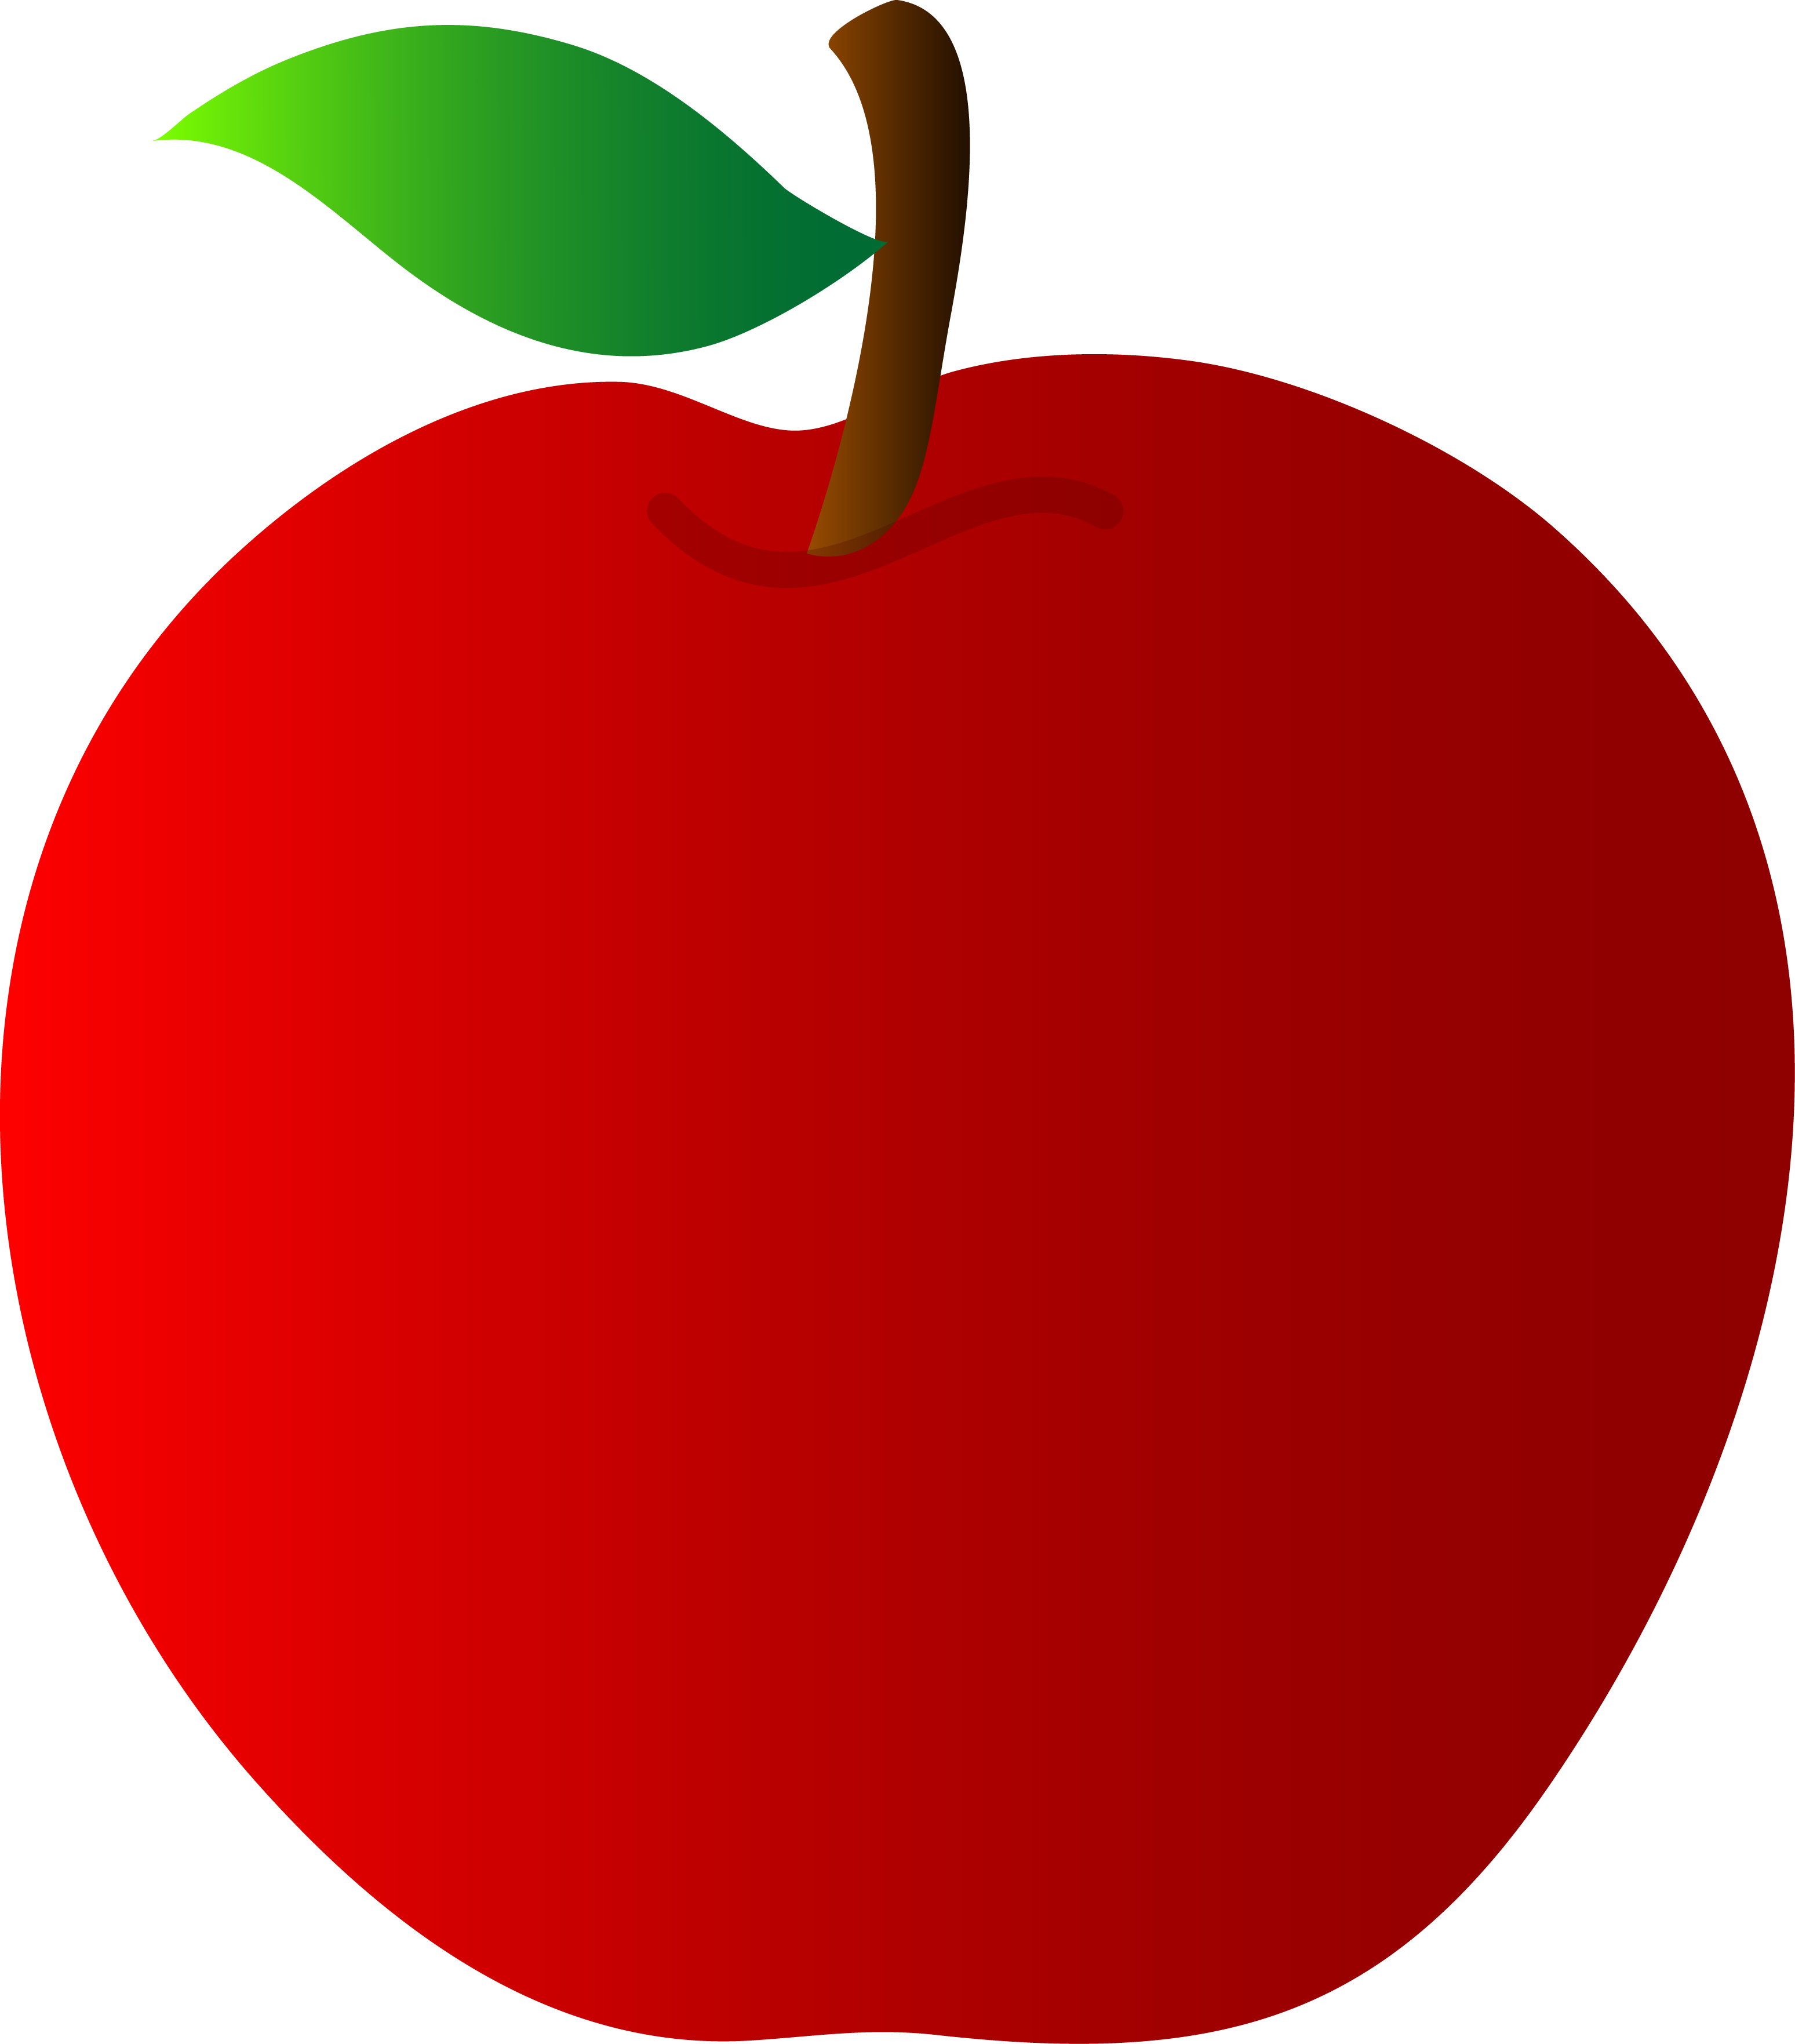 Teacher Apple And Pencil | Clipart Panda - Free Clipart Images